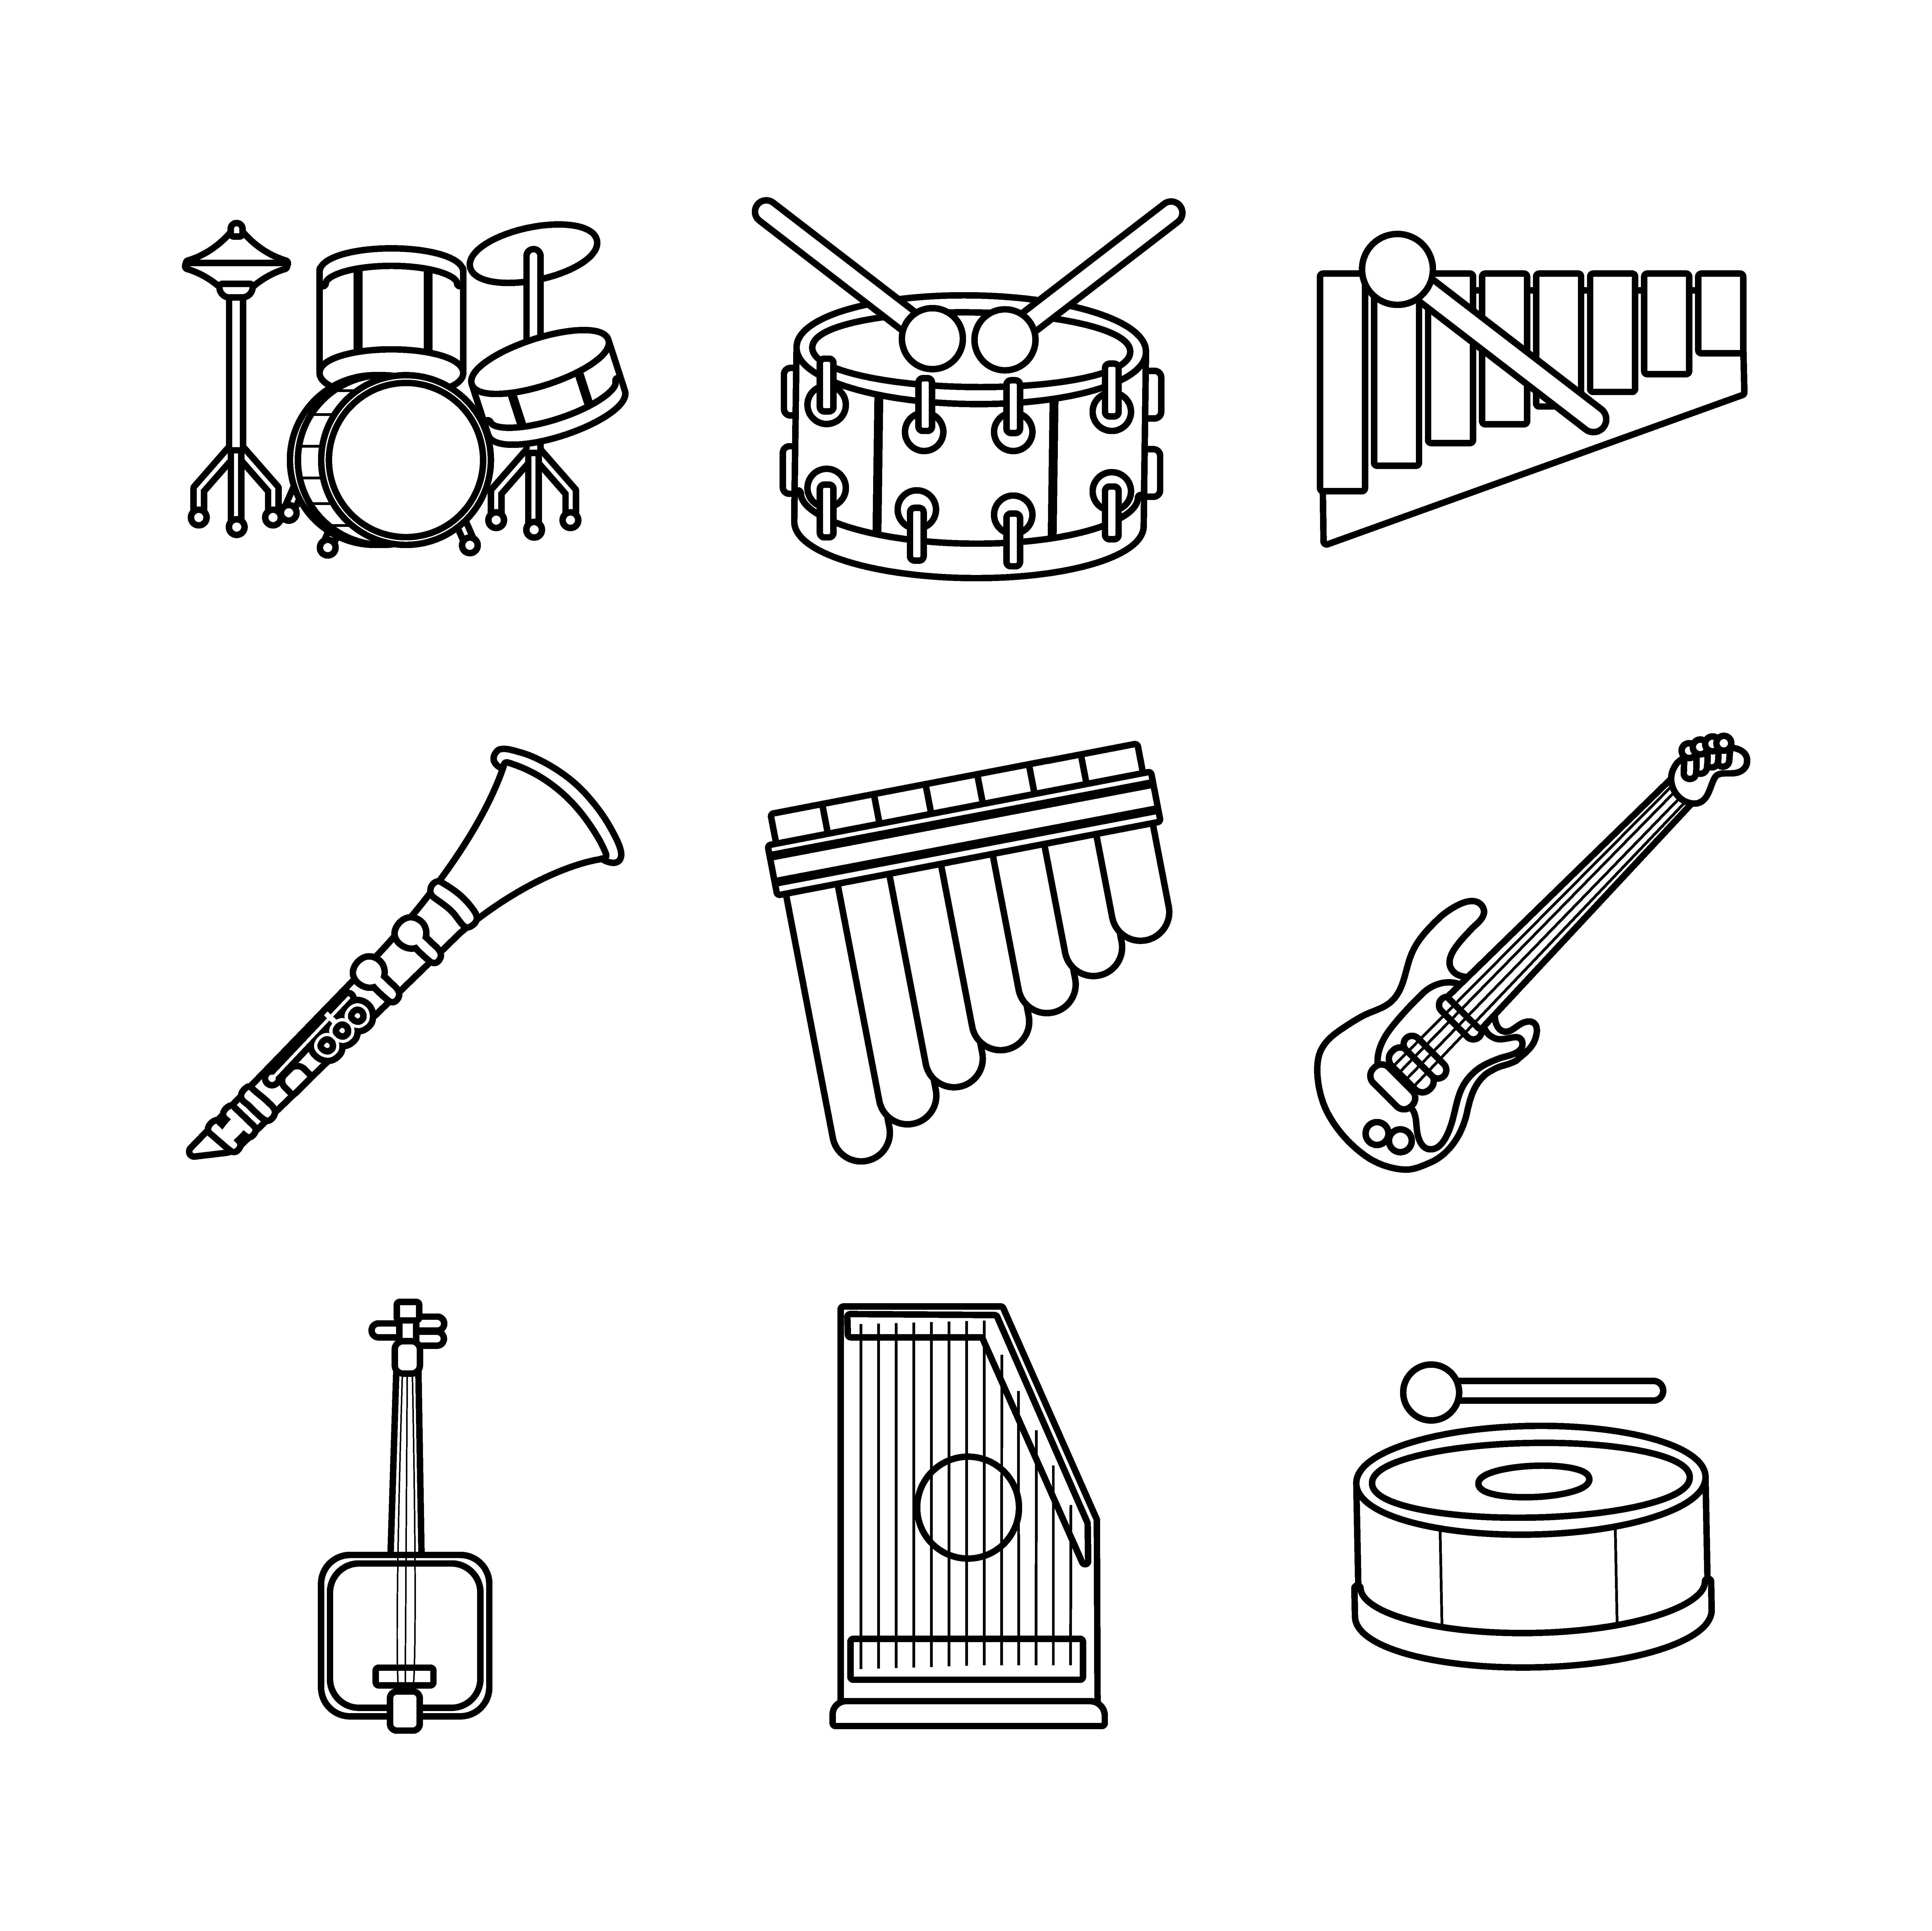 MUSICAL INSTRUMENTS Monochrome Hand Drawn Sketch Collection - Inspire Uplift-saigonsouth.com.vn